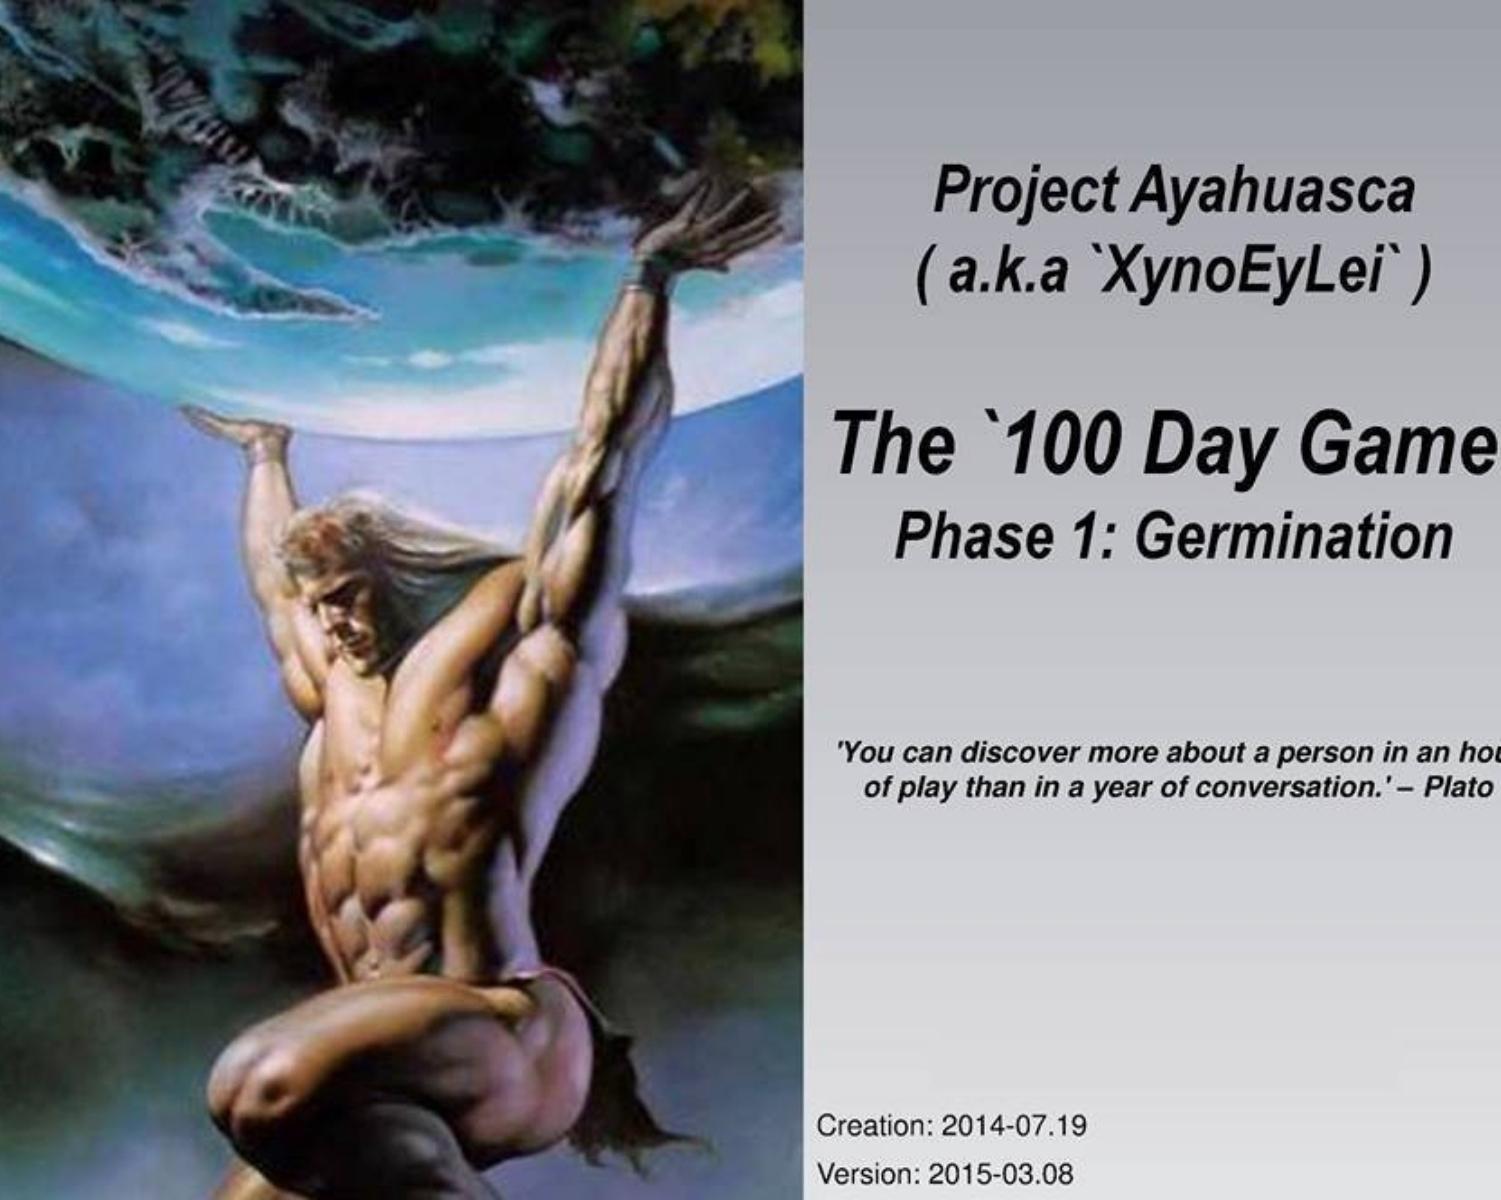 The 100 Day Game (Project Ayahuasca)